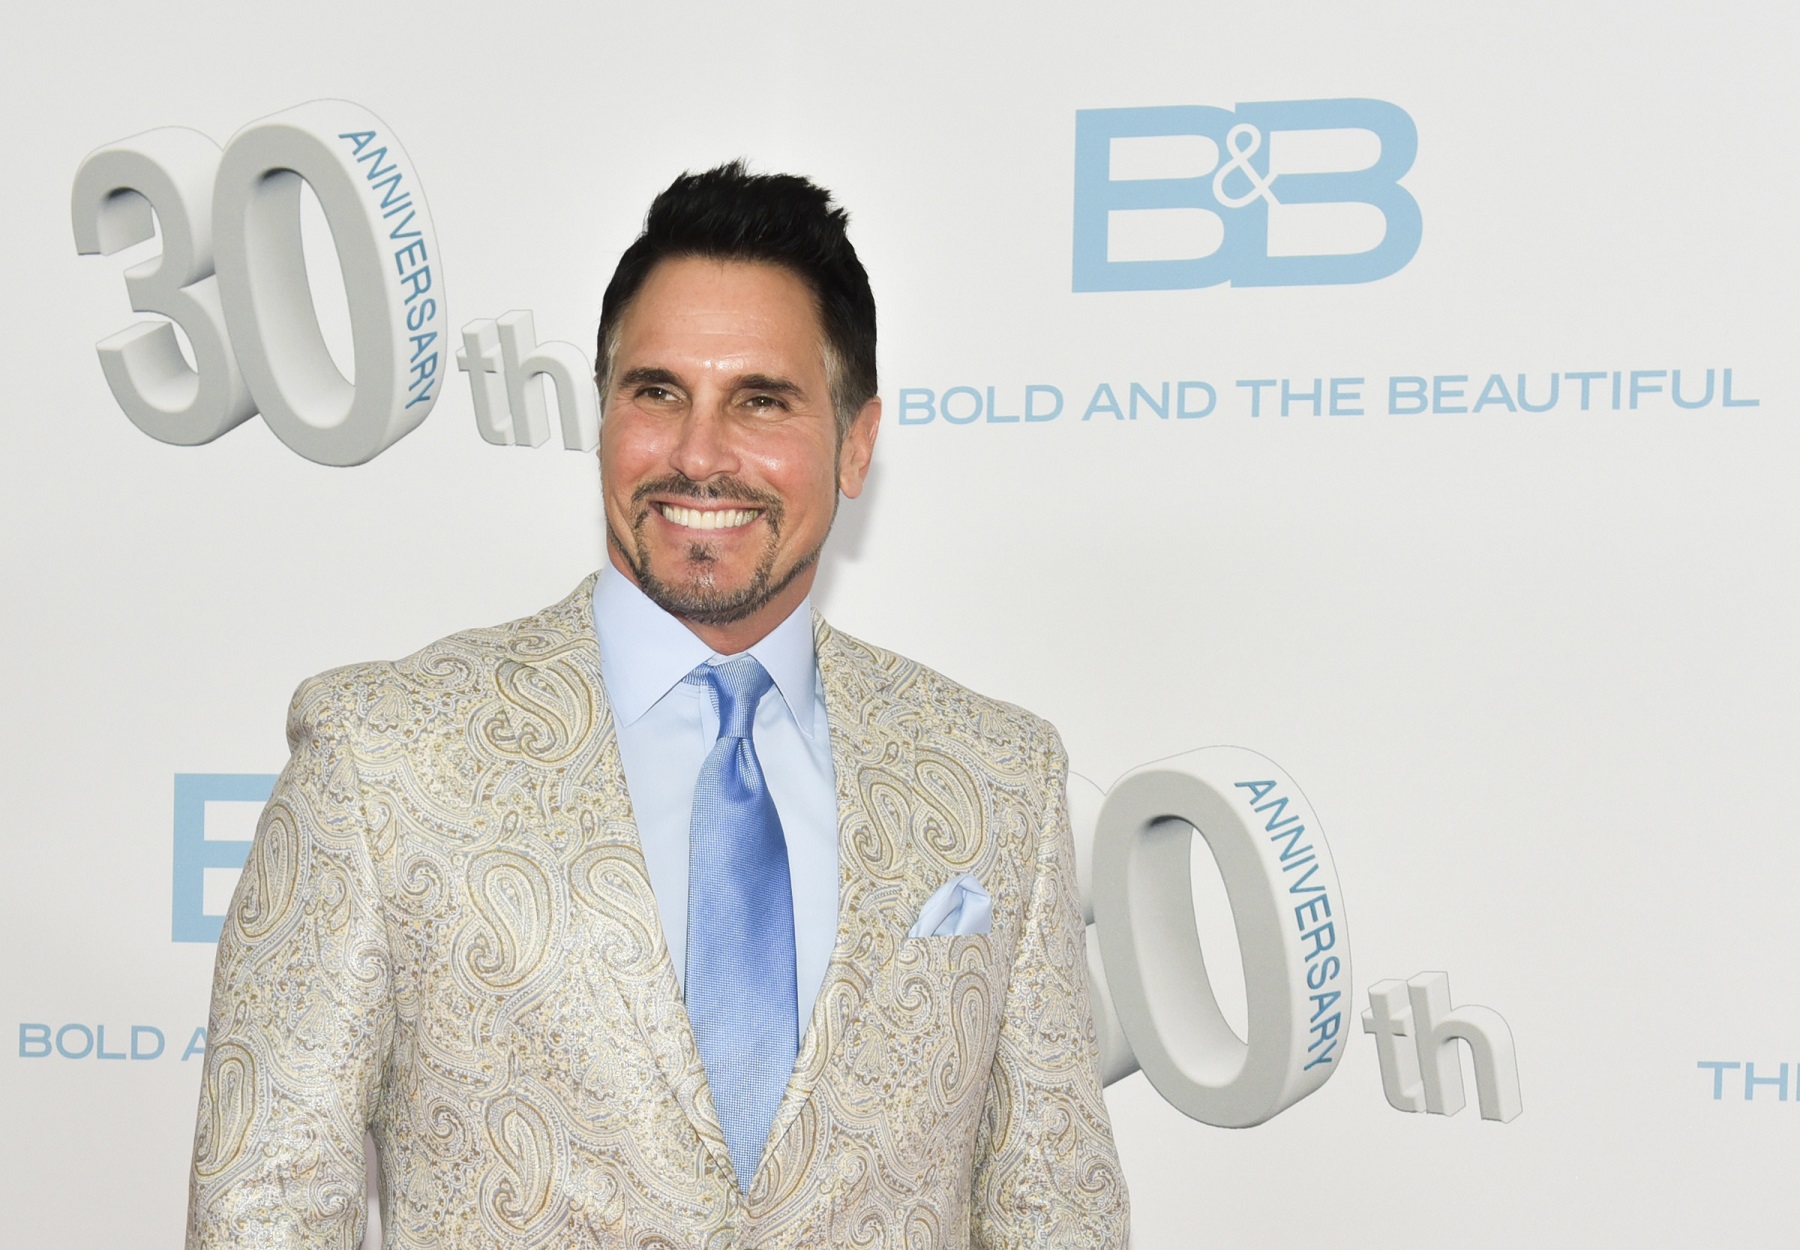 The Bold and the Beautiful star Don Diamont on the red carpet wearing a white linen jacket and a blue tie